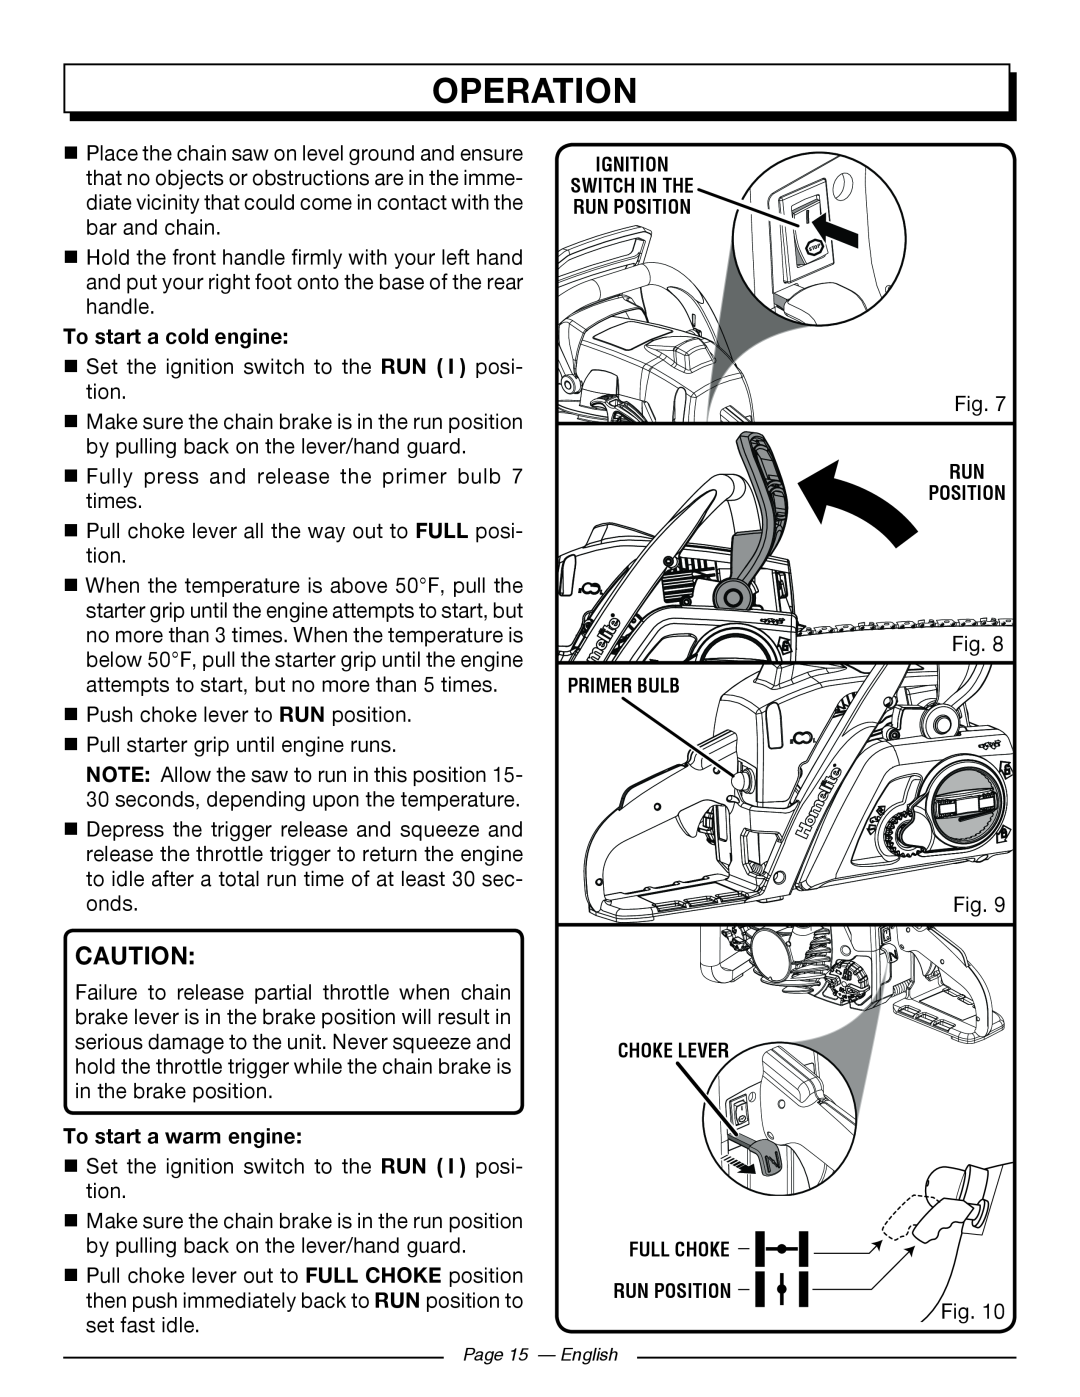 Homelite UT10562, UT10918, UT10585, UT10582 operation, To start a cold engine, To start a warm engine, Page 15 - English 